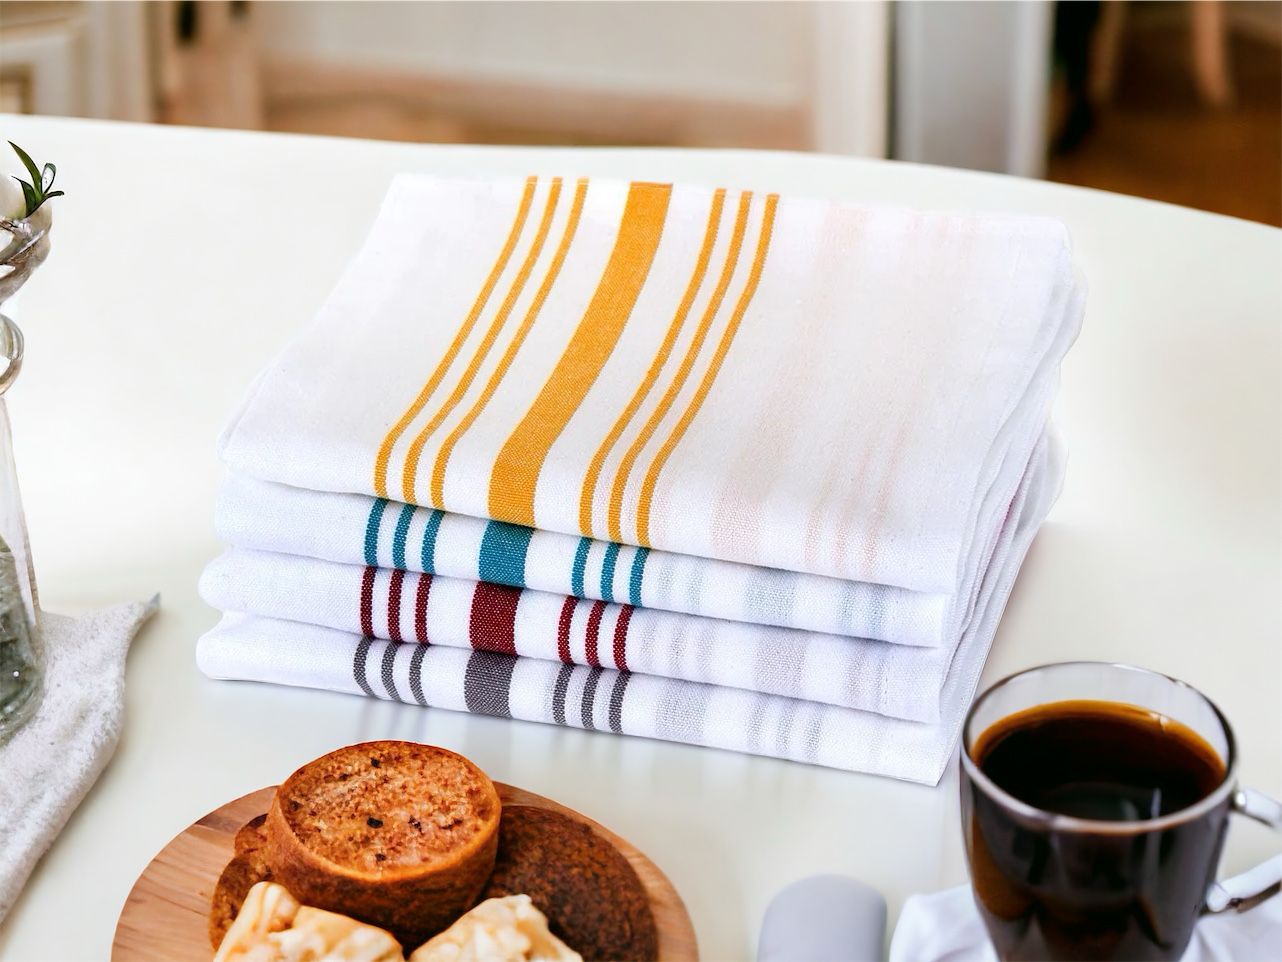 Tea Towel vs Dish Towel - Key Differences Between the Two and